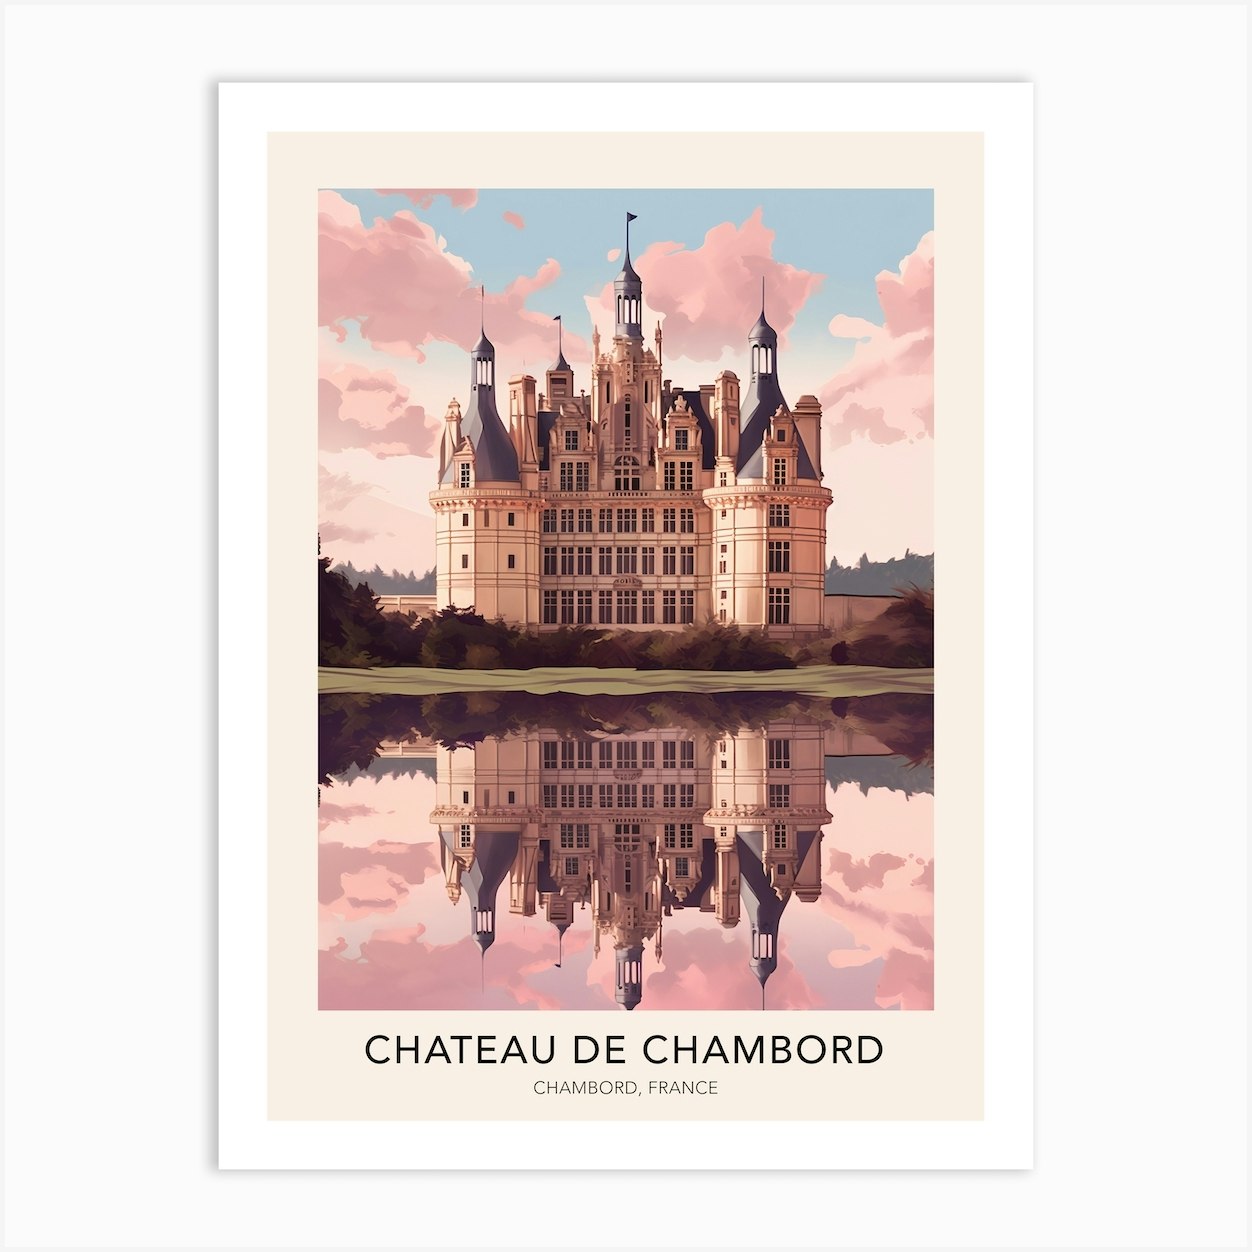 Chateau De Chambord France Travel Print Art by Fy The Adventure Poster - Art of